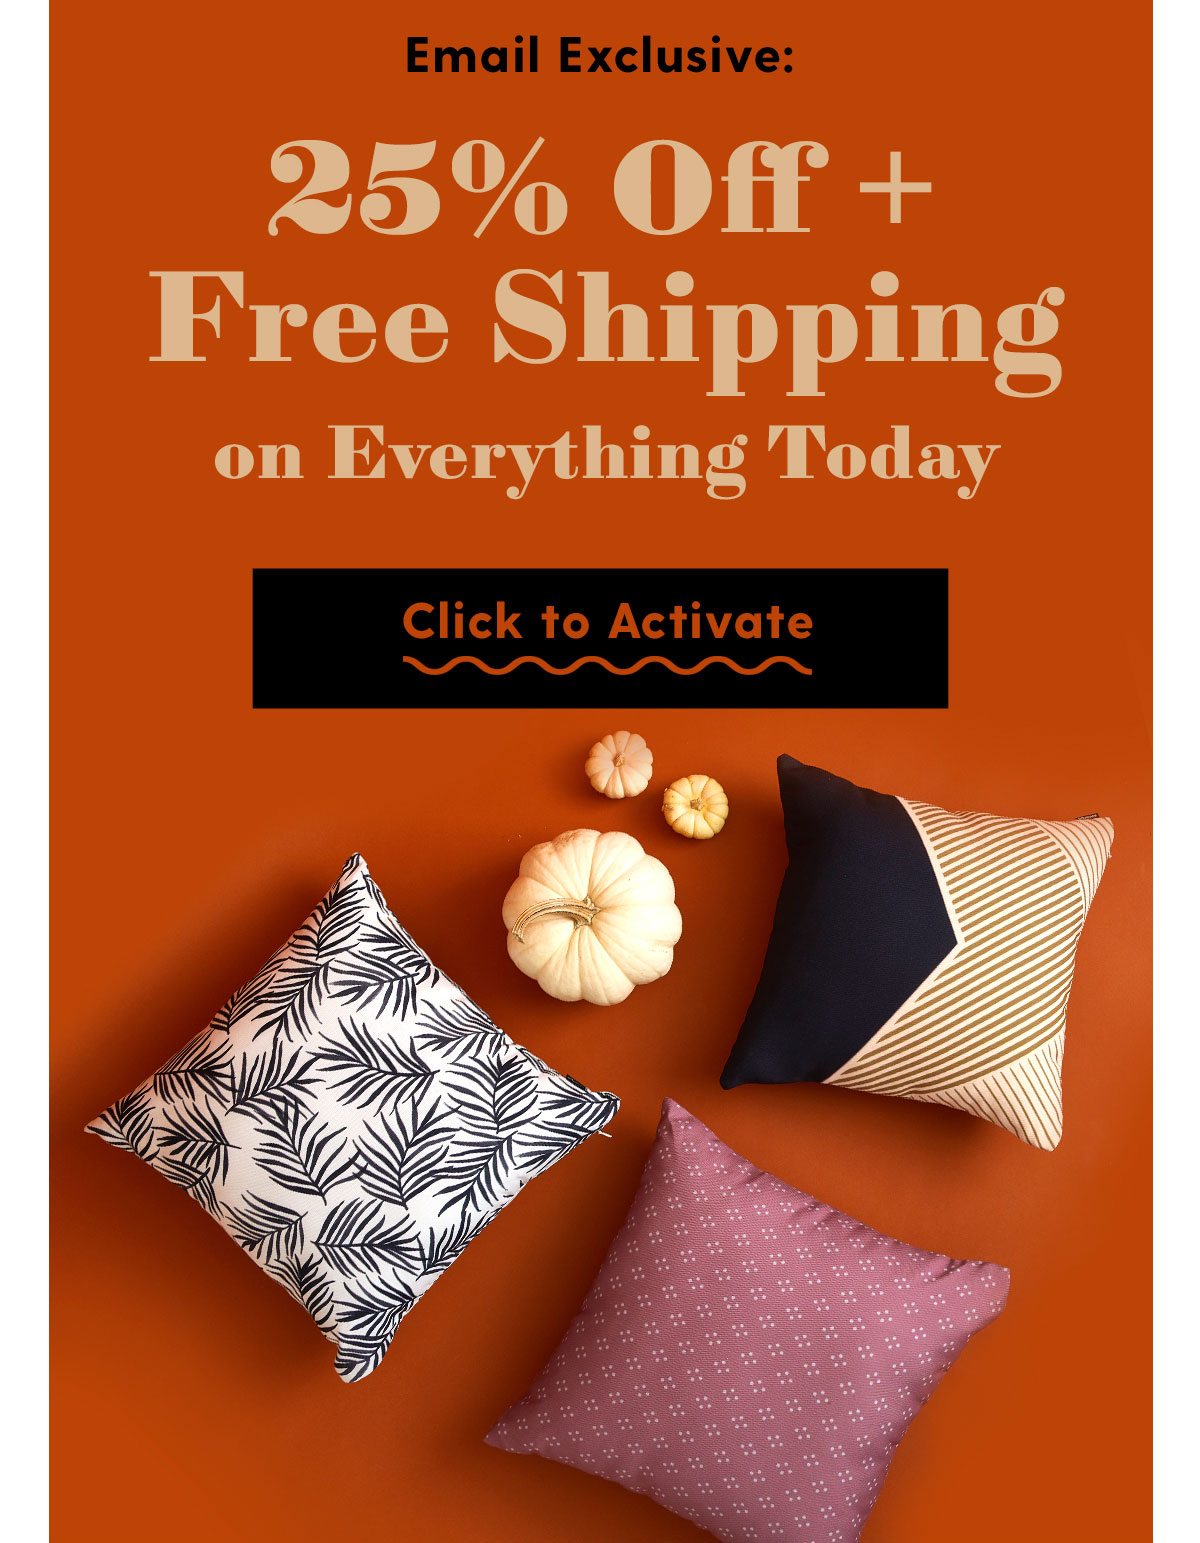 Email Exclusive: 25% Off + Free Shipping on Everything Today. Click to Activate >